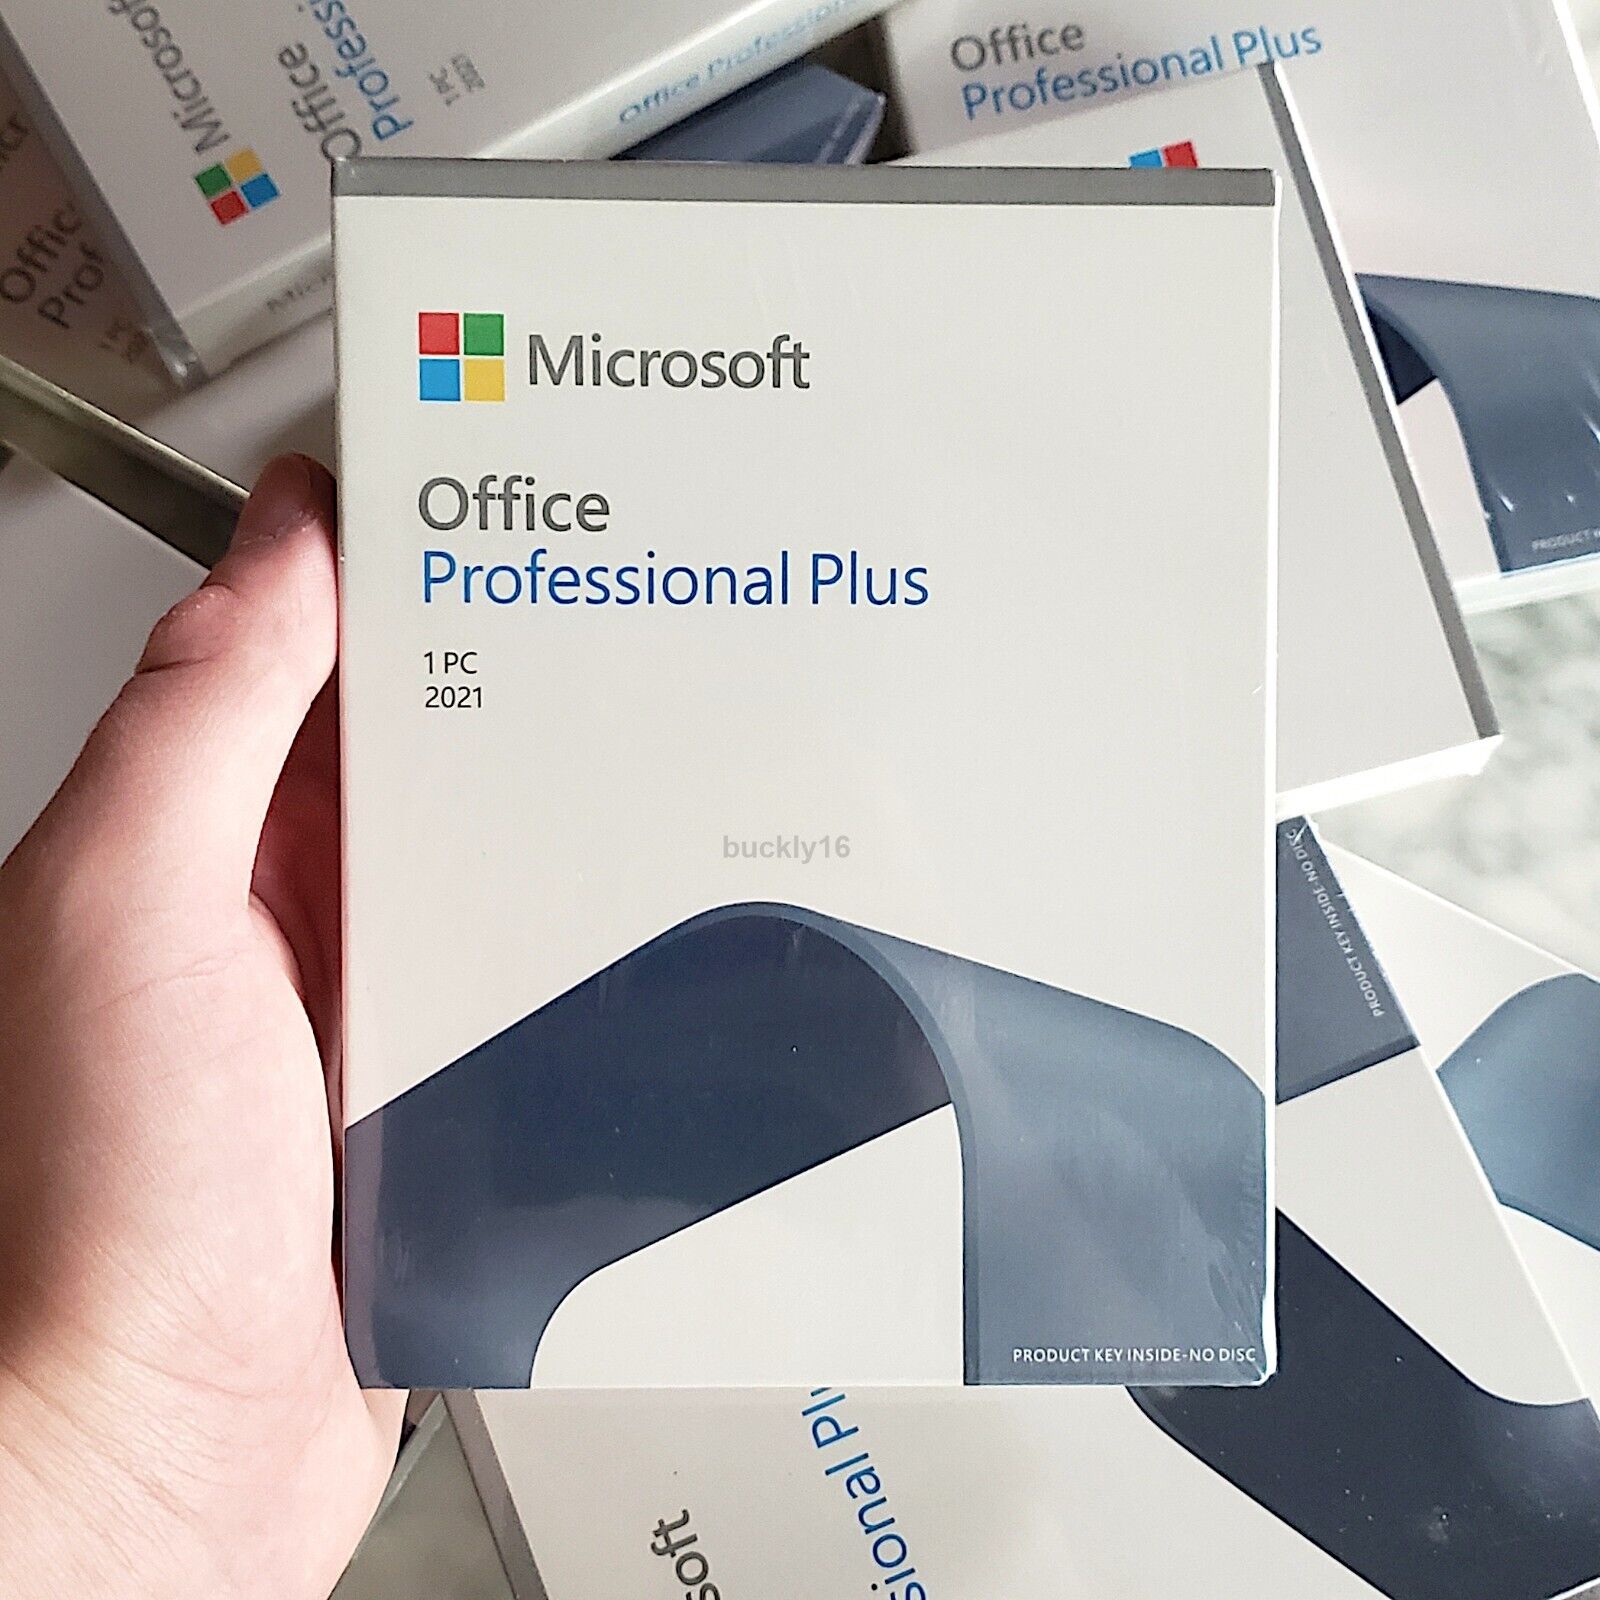 Microsoft MS Office 2021 Pro Professional Plus USB Flash Package Activation Key